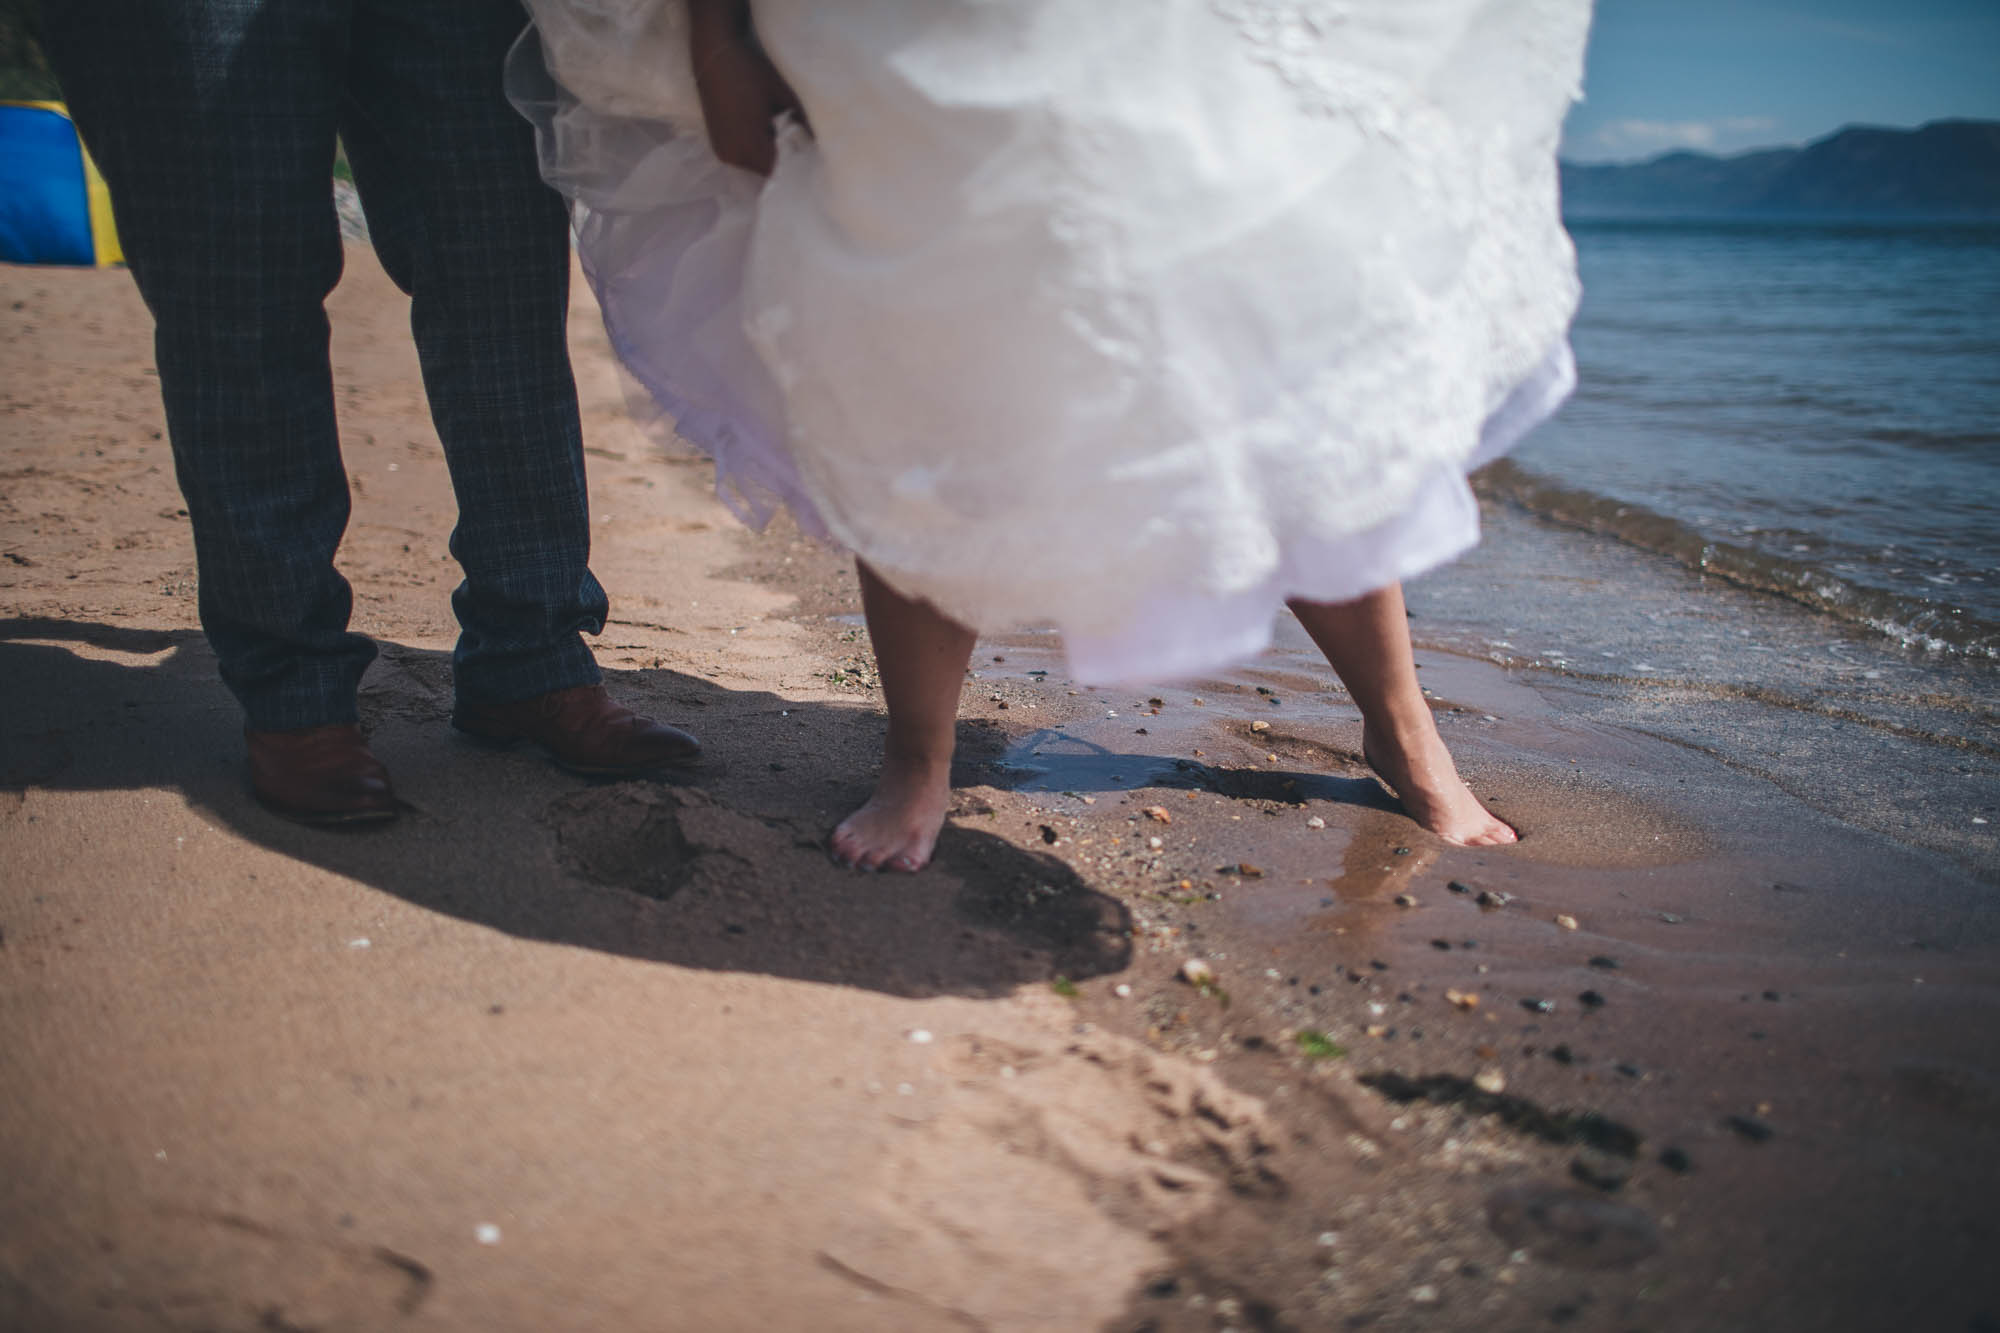 Low shot of Bride lifting her wedding dress as she steps out of the seaside after a quick paddle